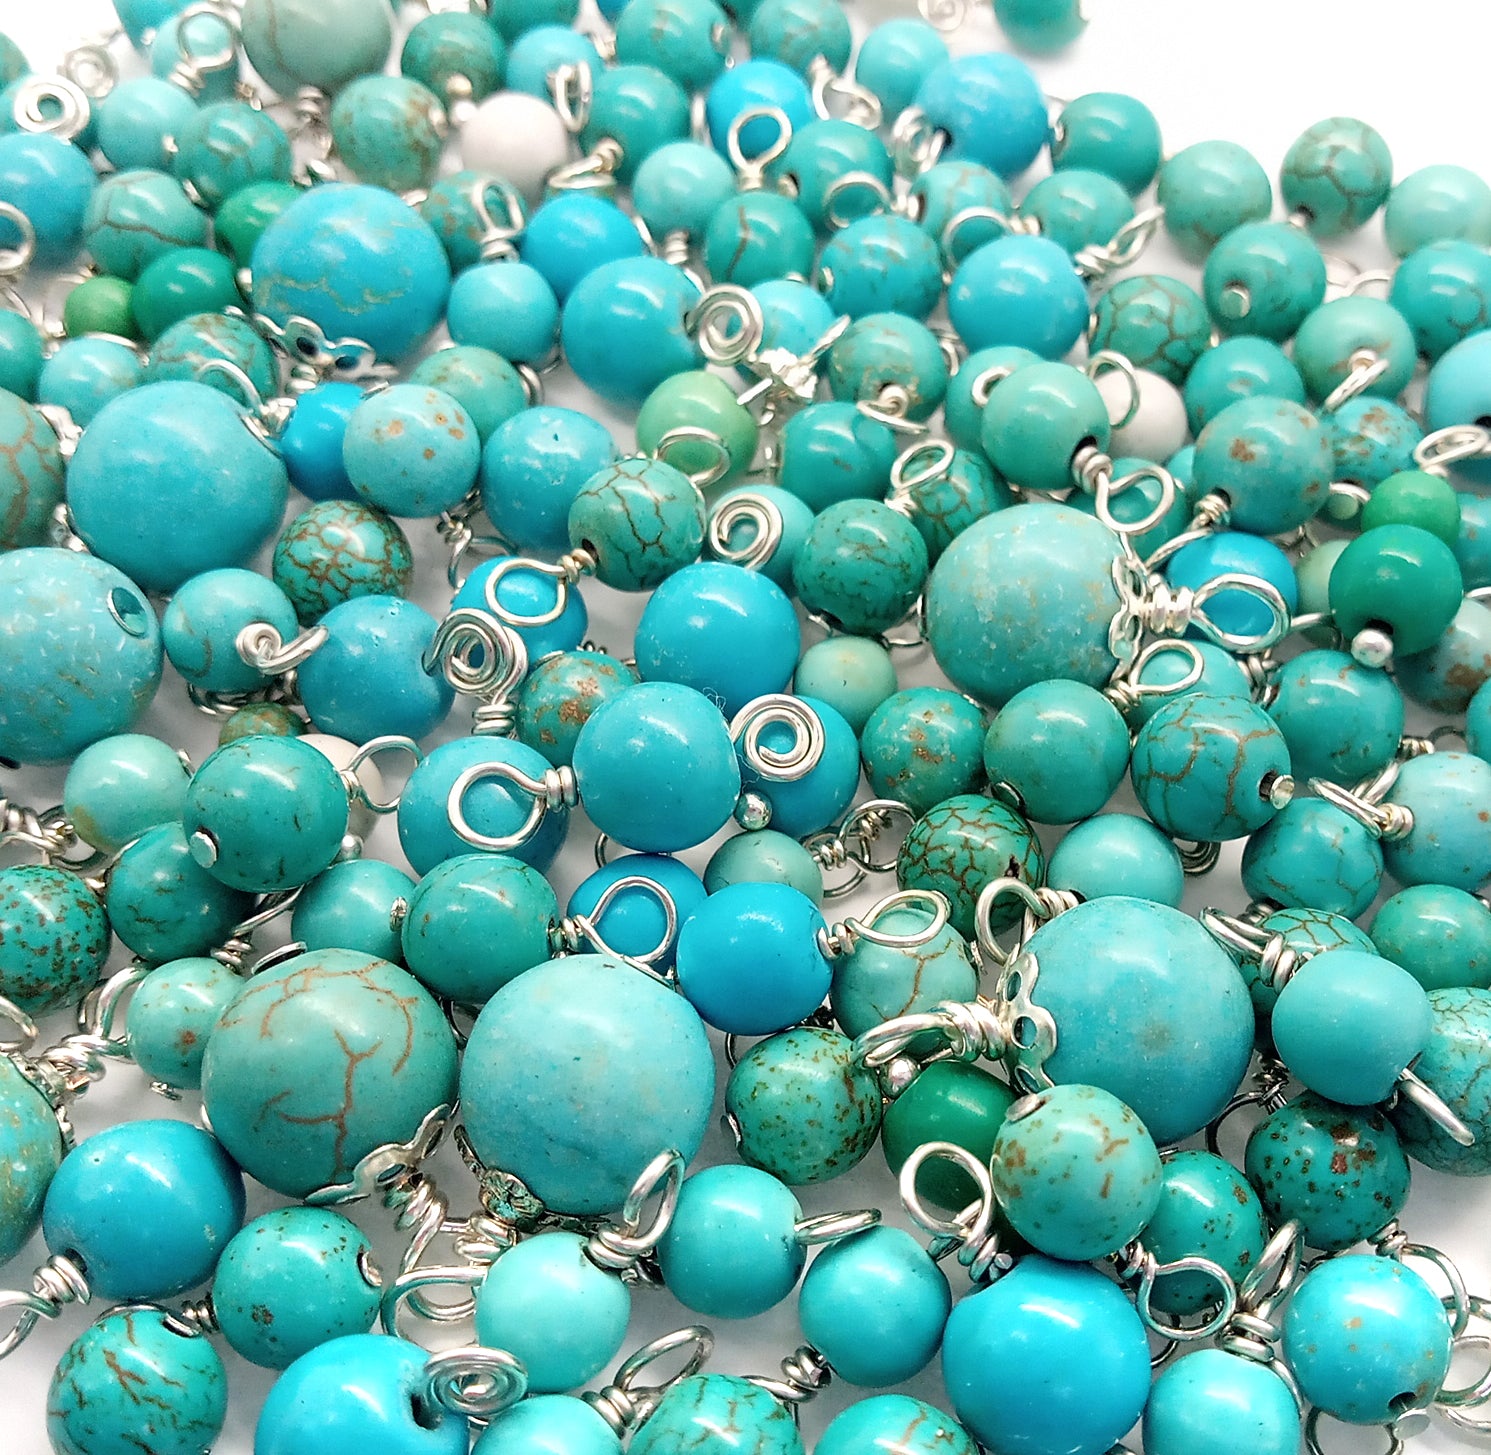 Mixed Magnesite Bead Charms, 20pc Blue Stone Dangles